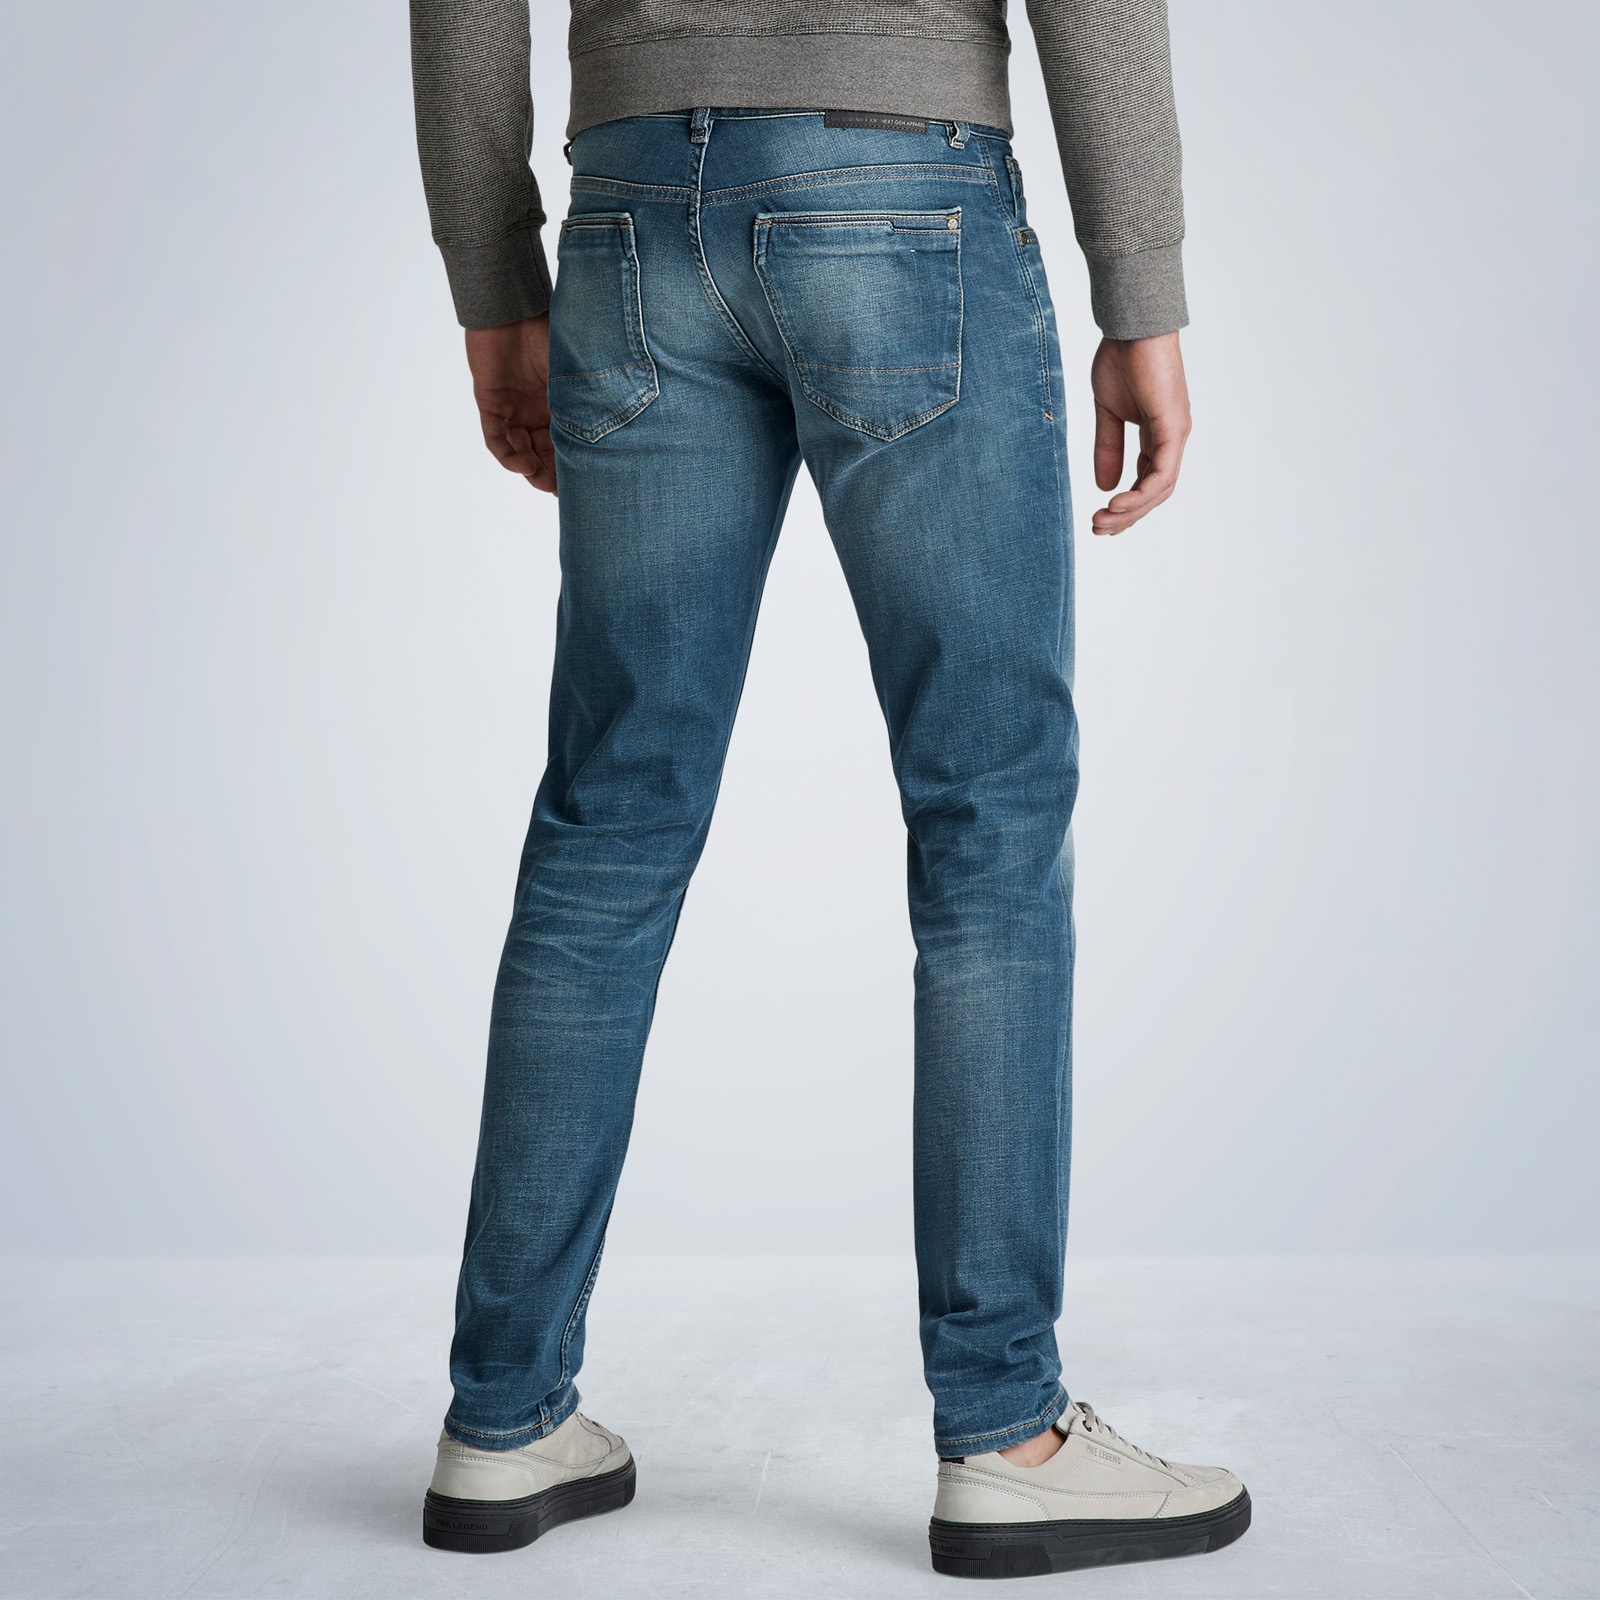 PME LEGEND | XV shipping | Denim Jeans returns and Free